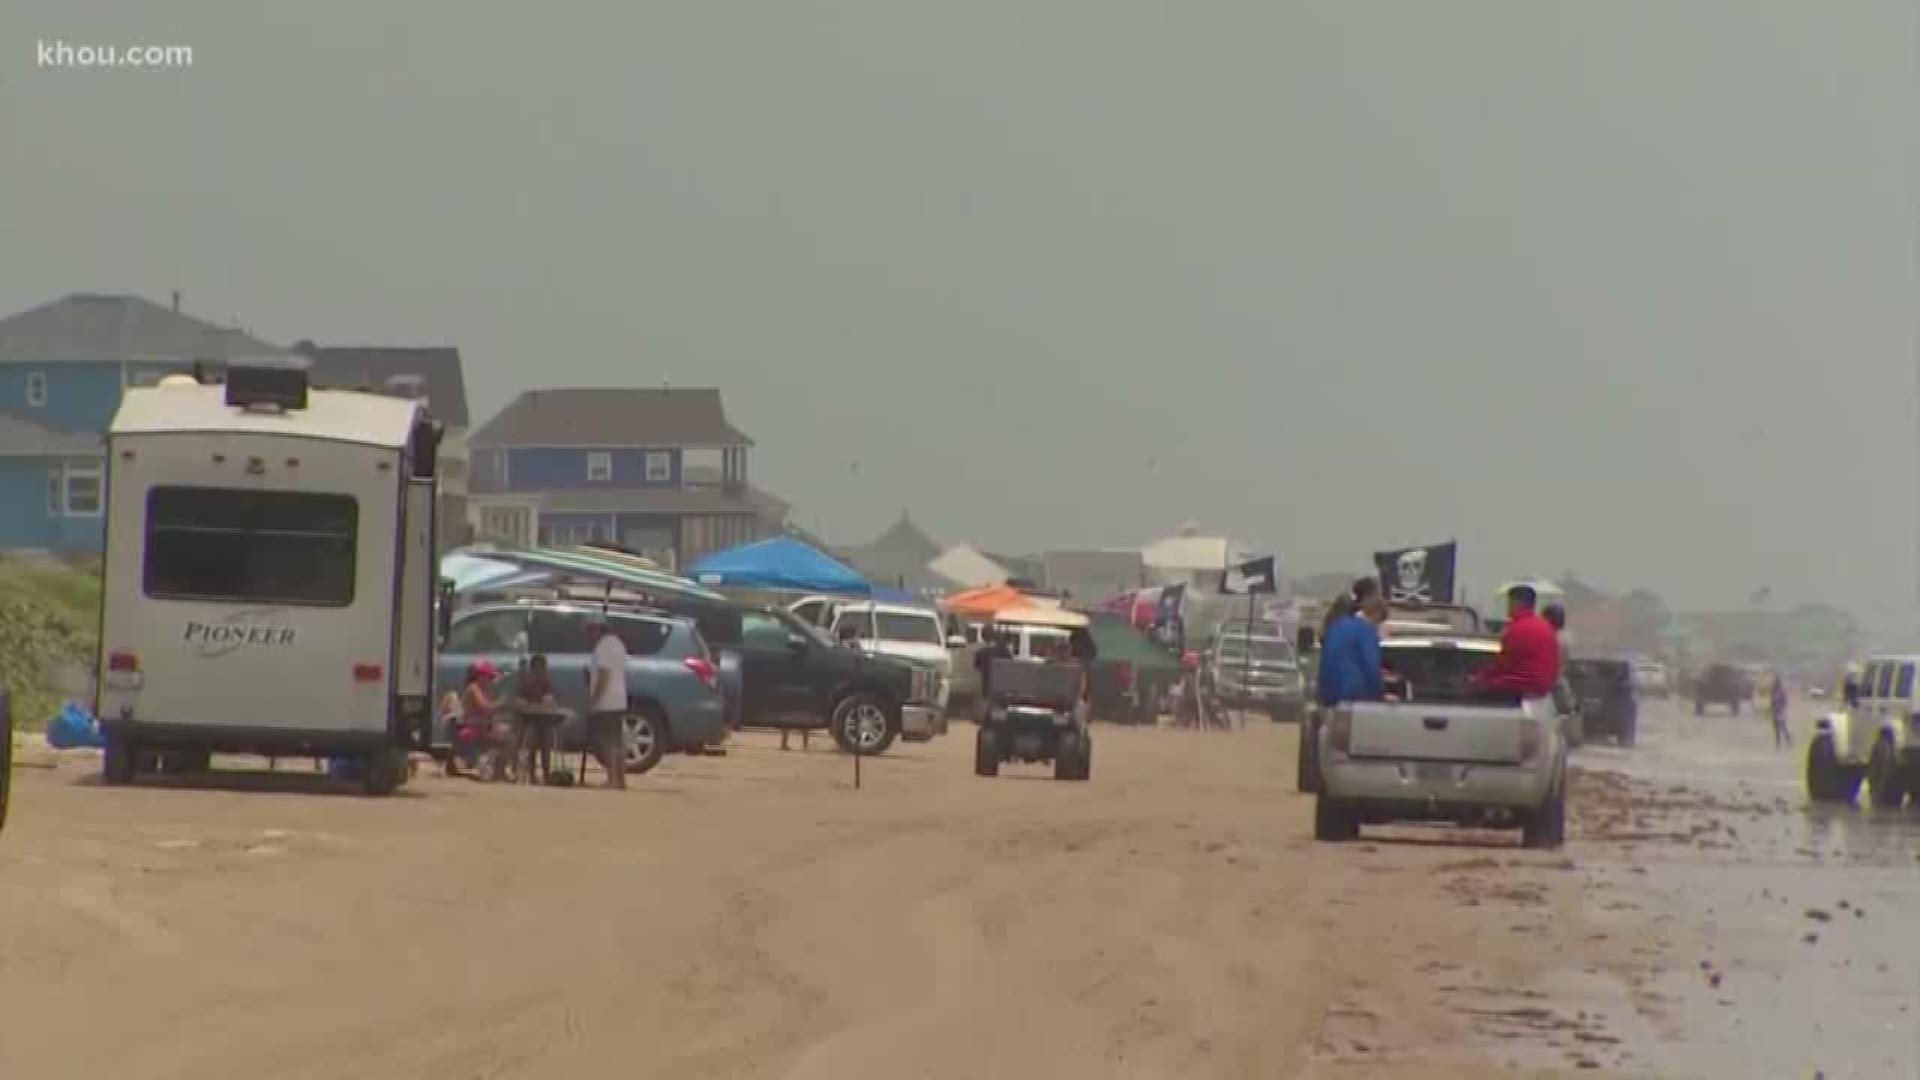 EMS and law enforcement responded to more than 400 911 calls on Bolivar Peninsula alone during the “Go Topless” Jeep weekend at Crystal Beach, Galveston County Sheriff Henry Trochesset confirmed.